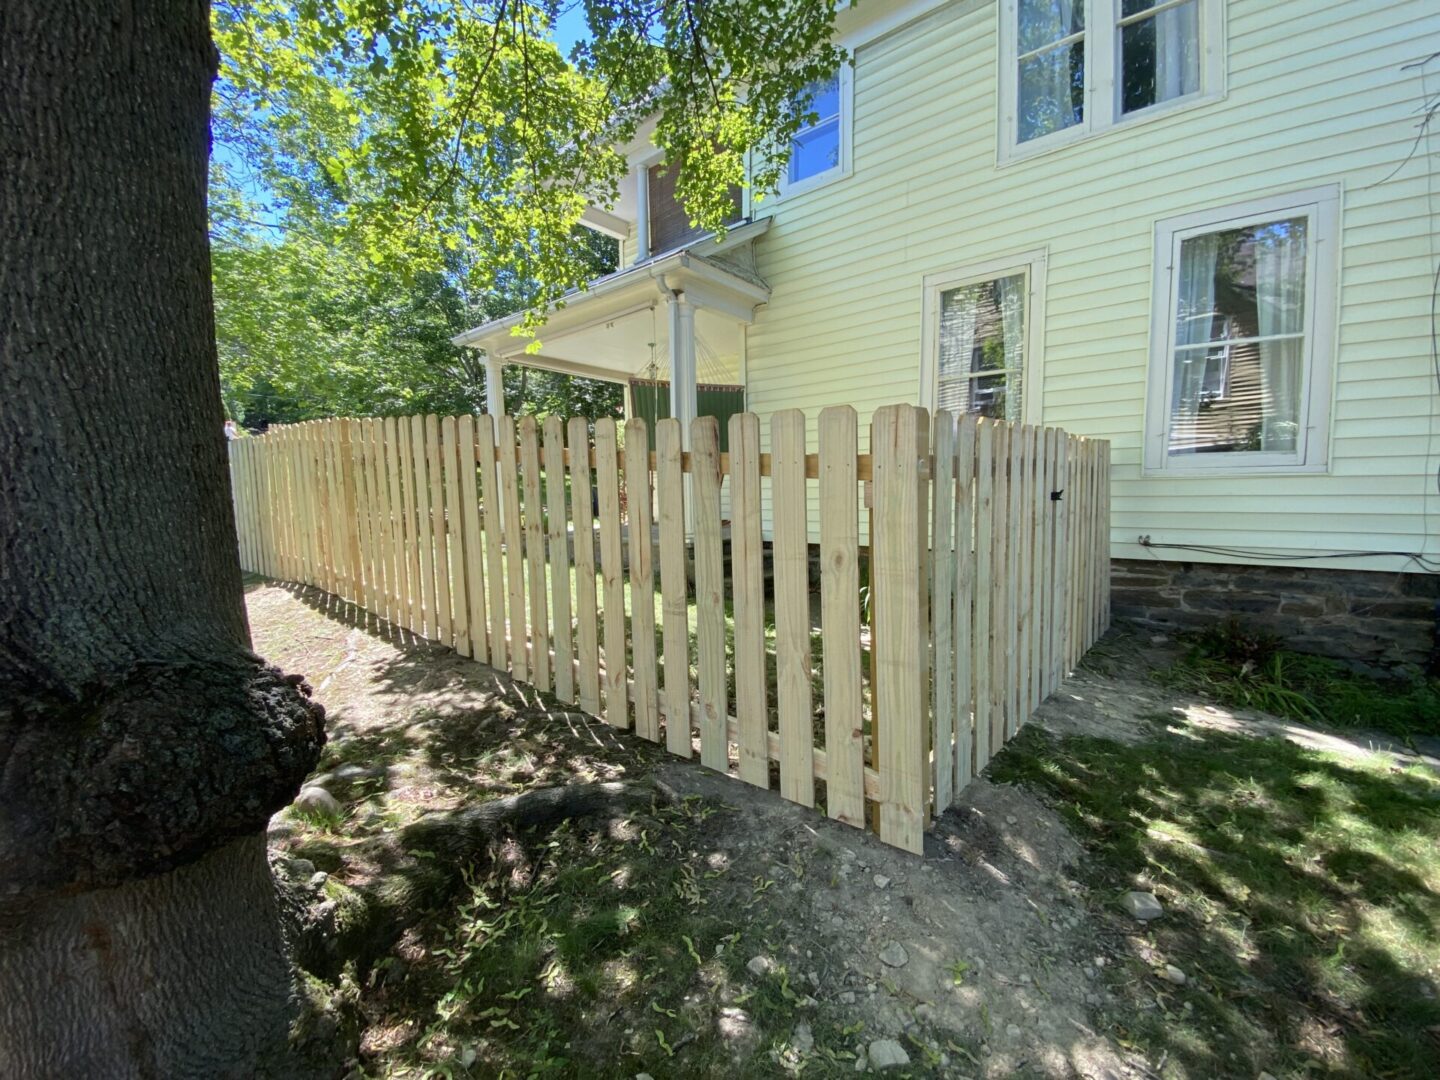 A wooden fence in front of a house.